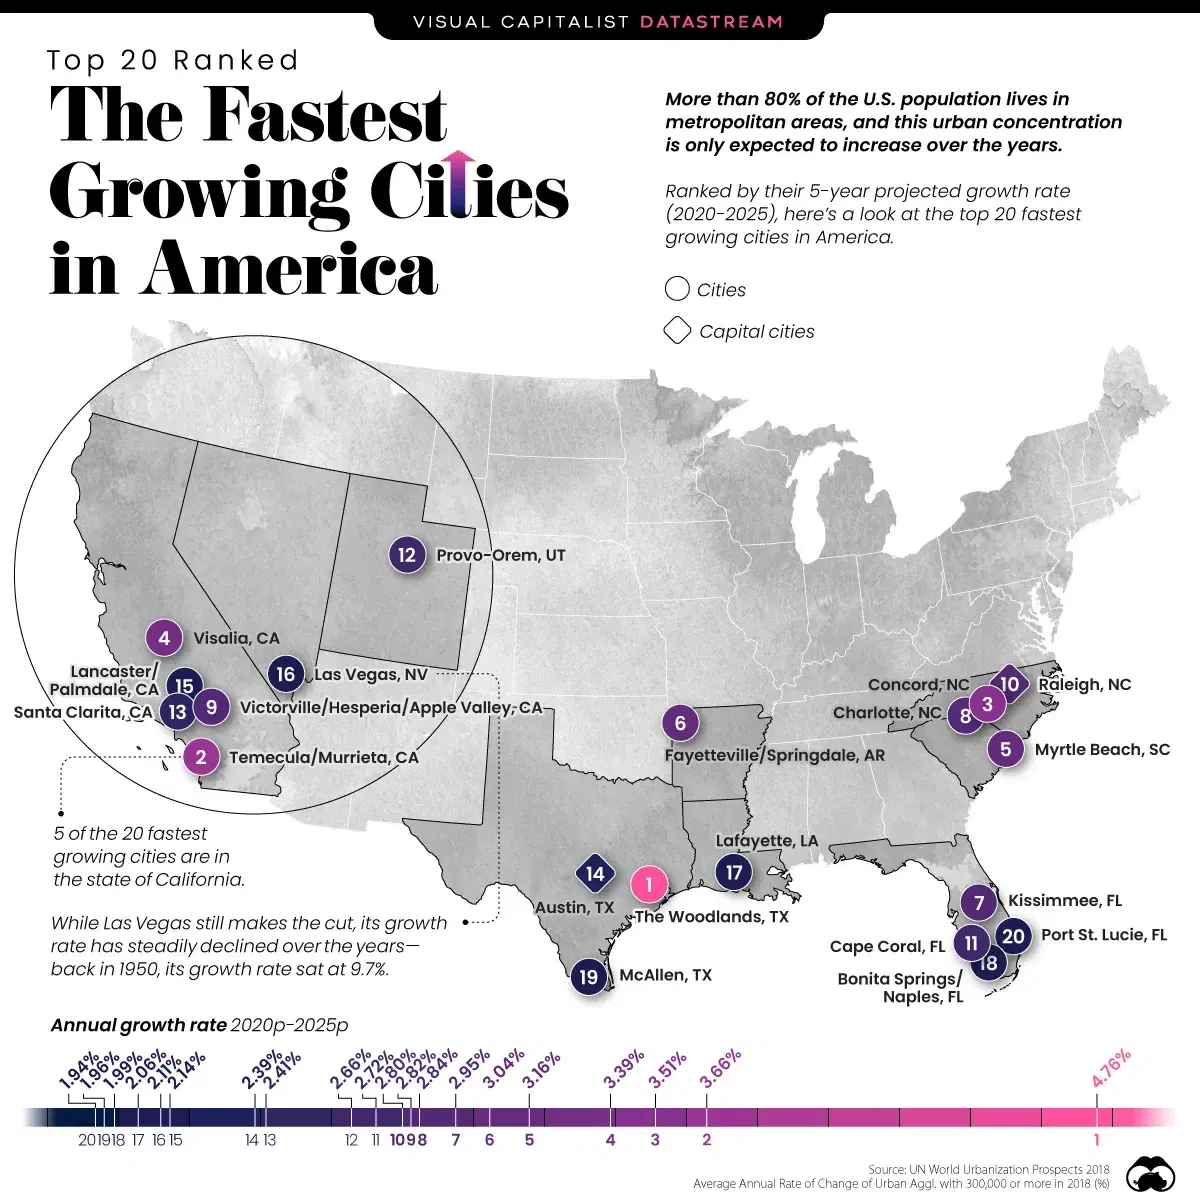 The Fastest Growing Cities in the U.S.